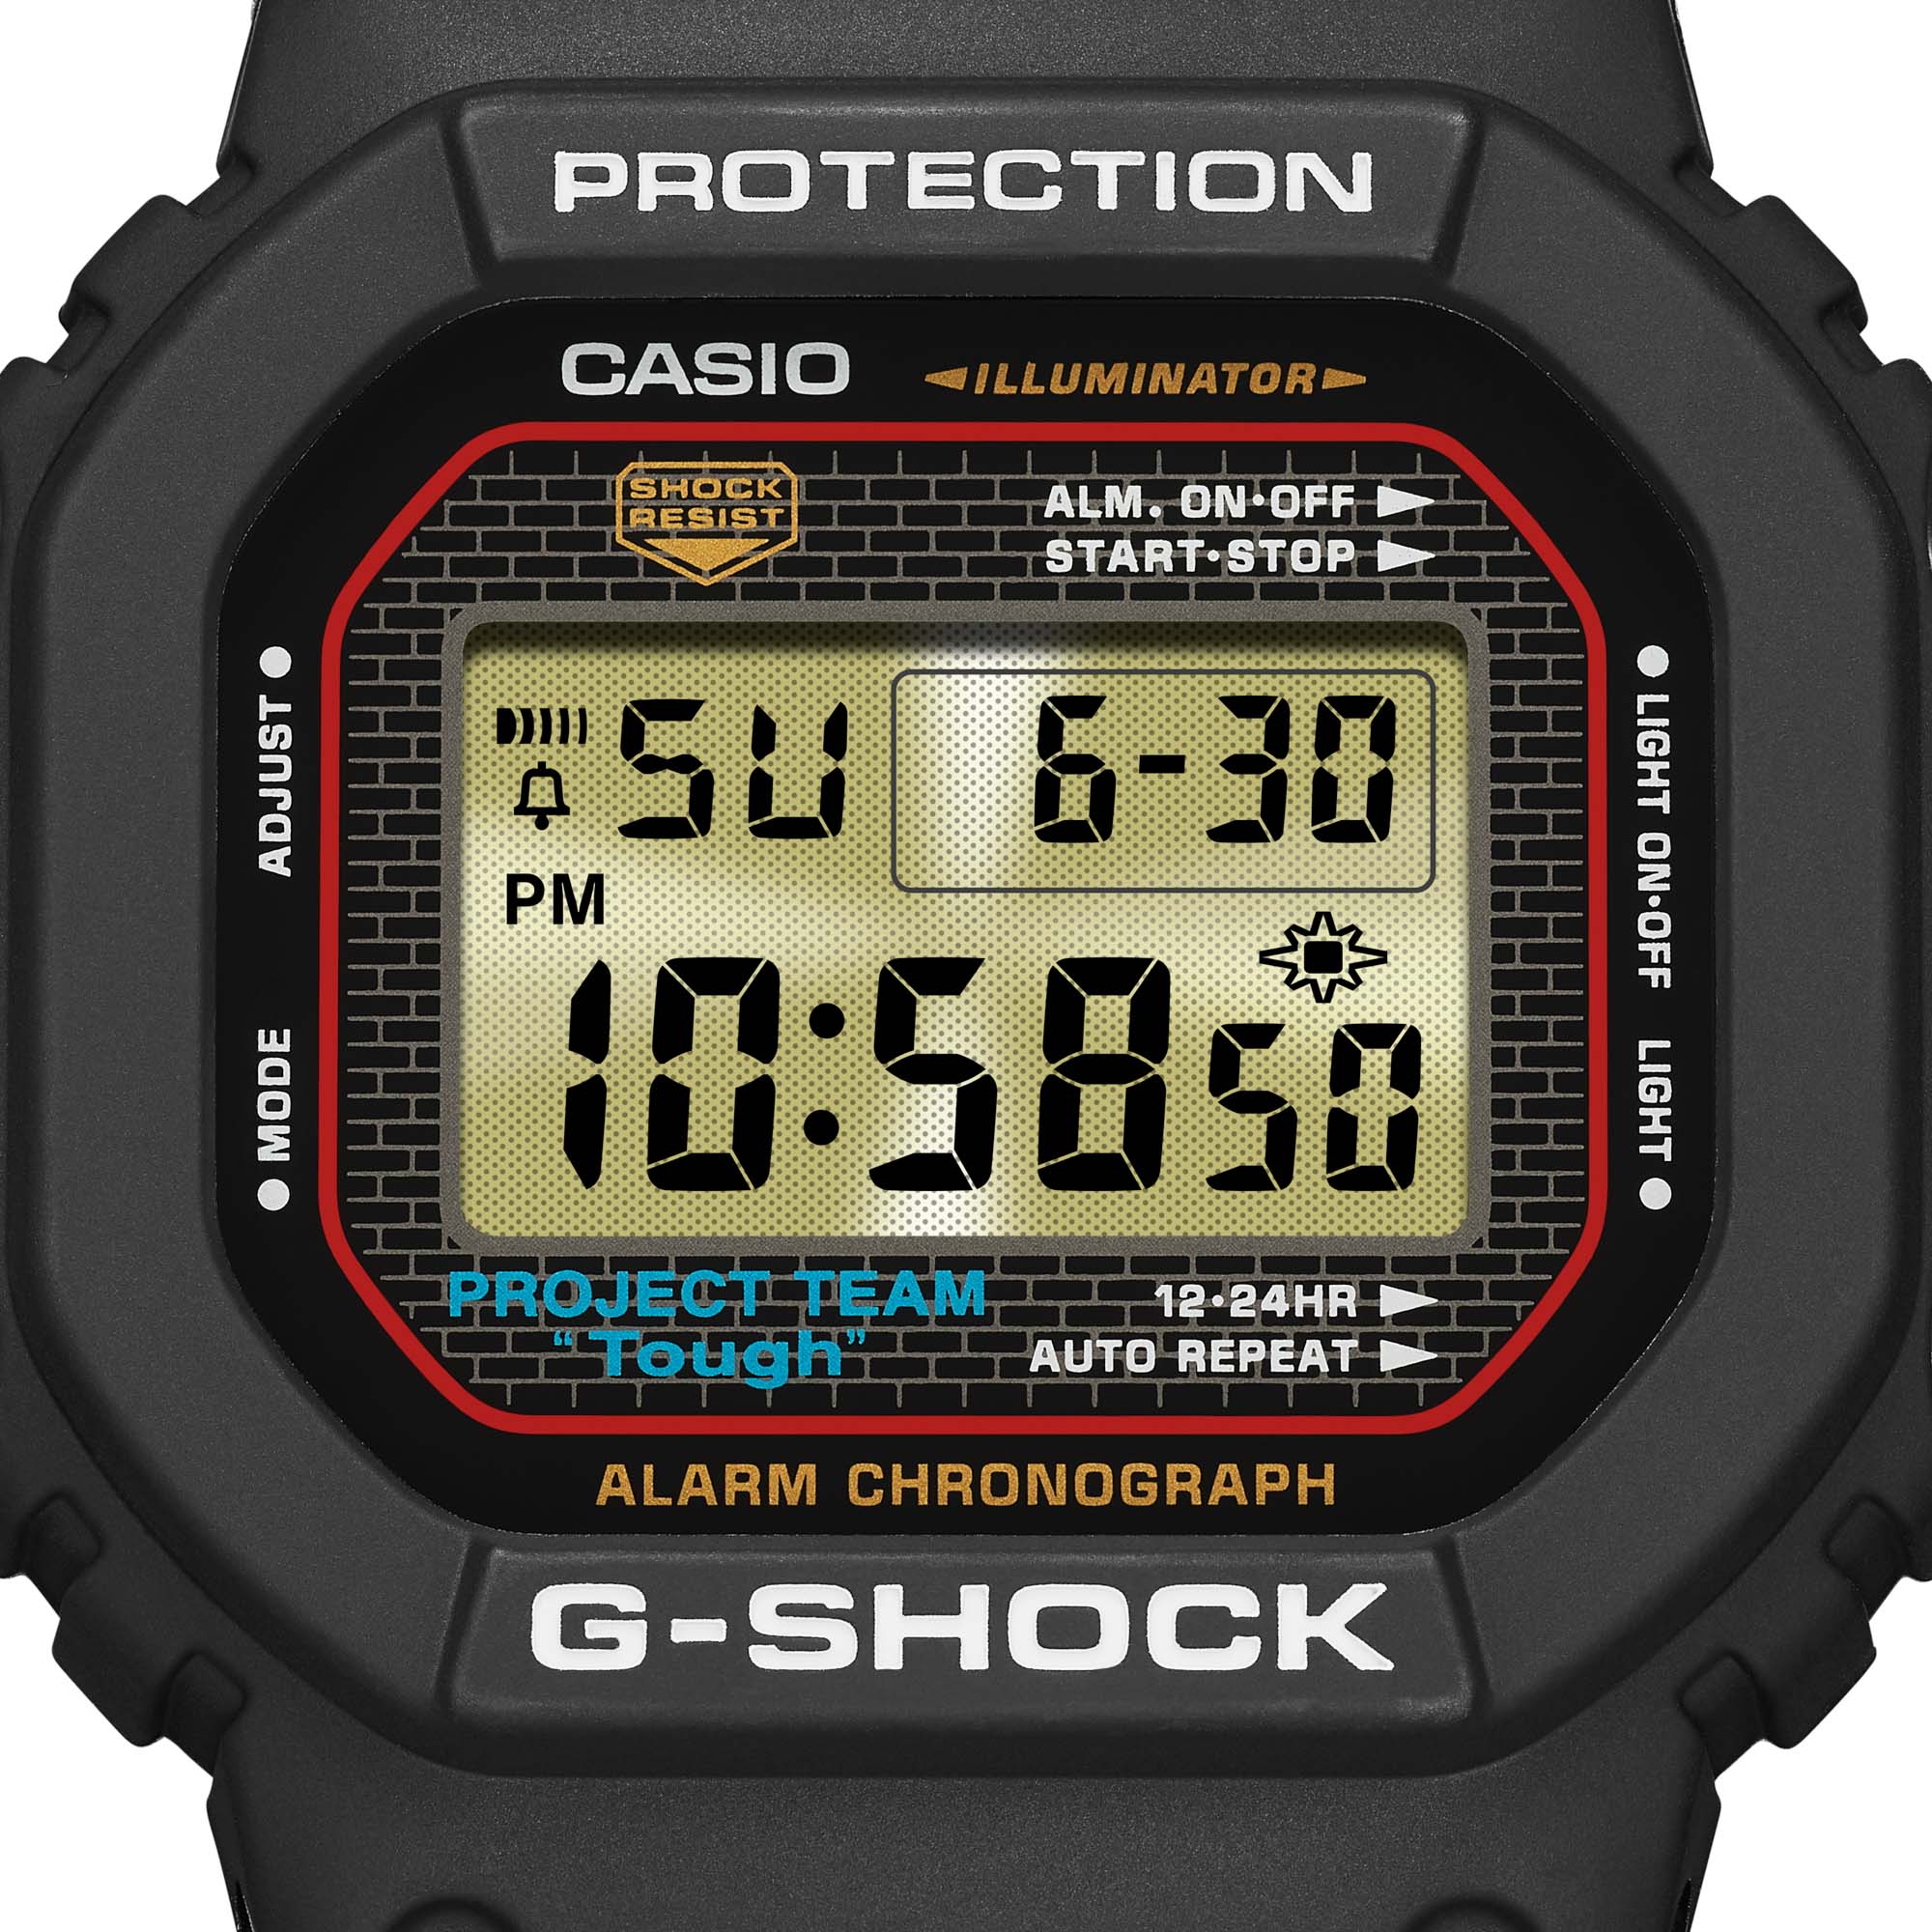 G-Shock's first 40th anniversary watches glow in the dark